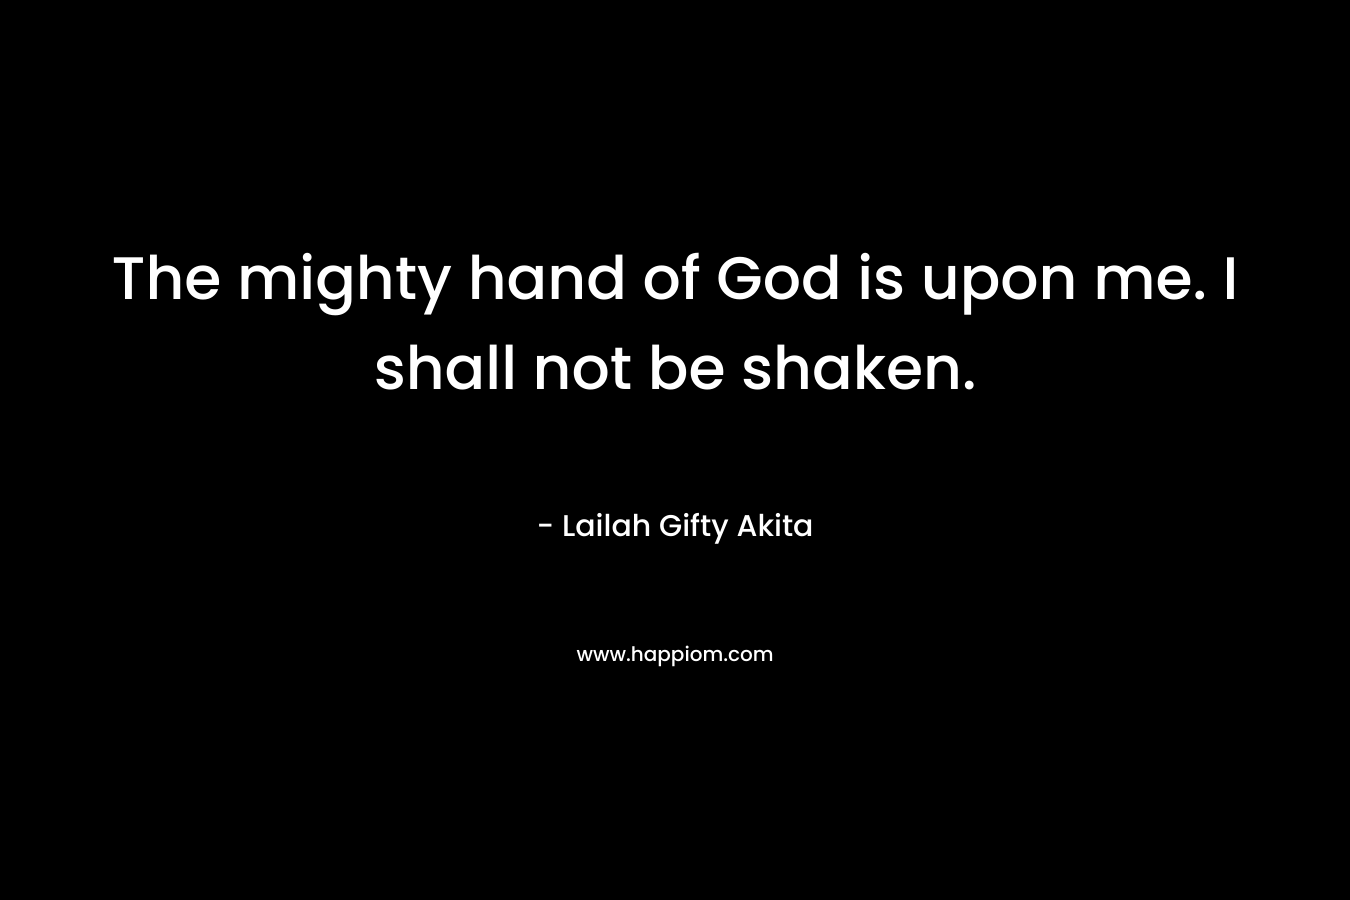 The mighty hand of God is upon me. I shall not be shaken. – Lailah Gifty Akita